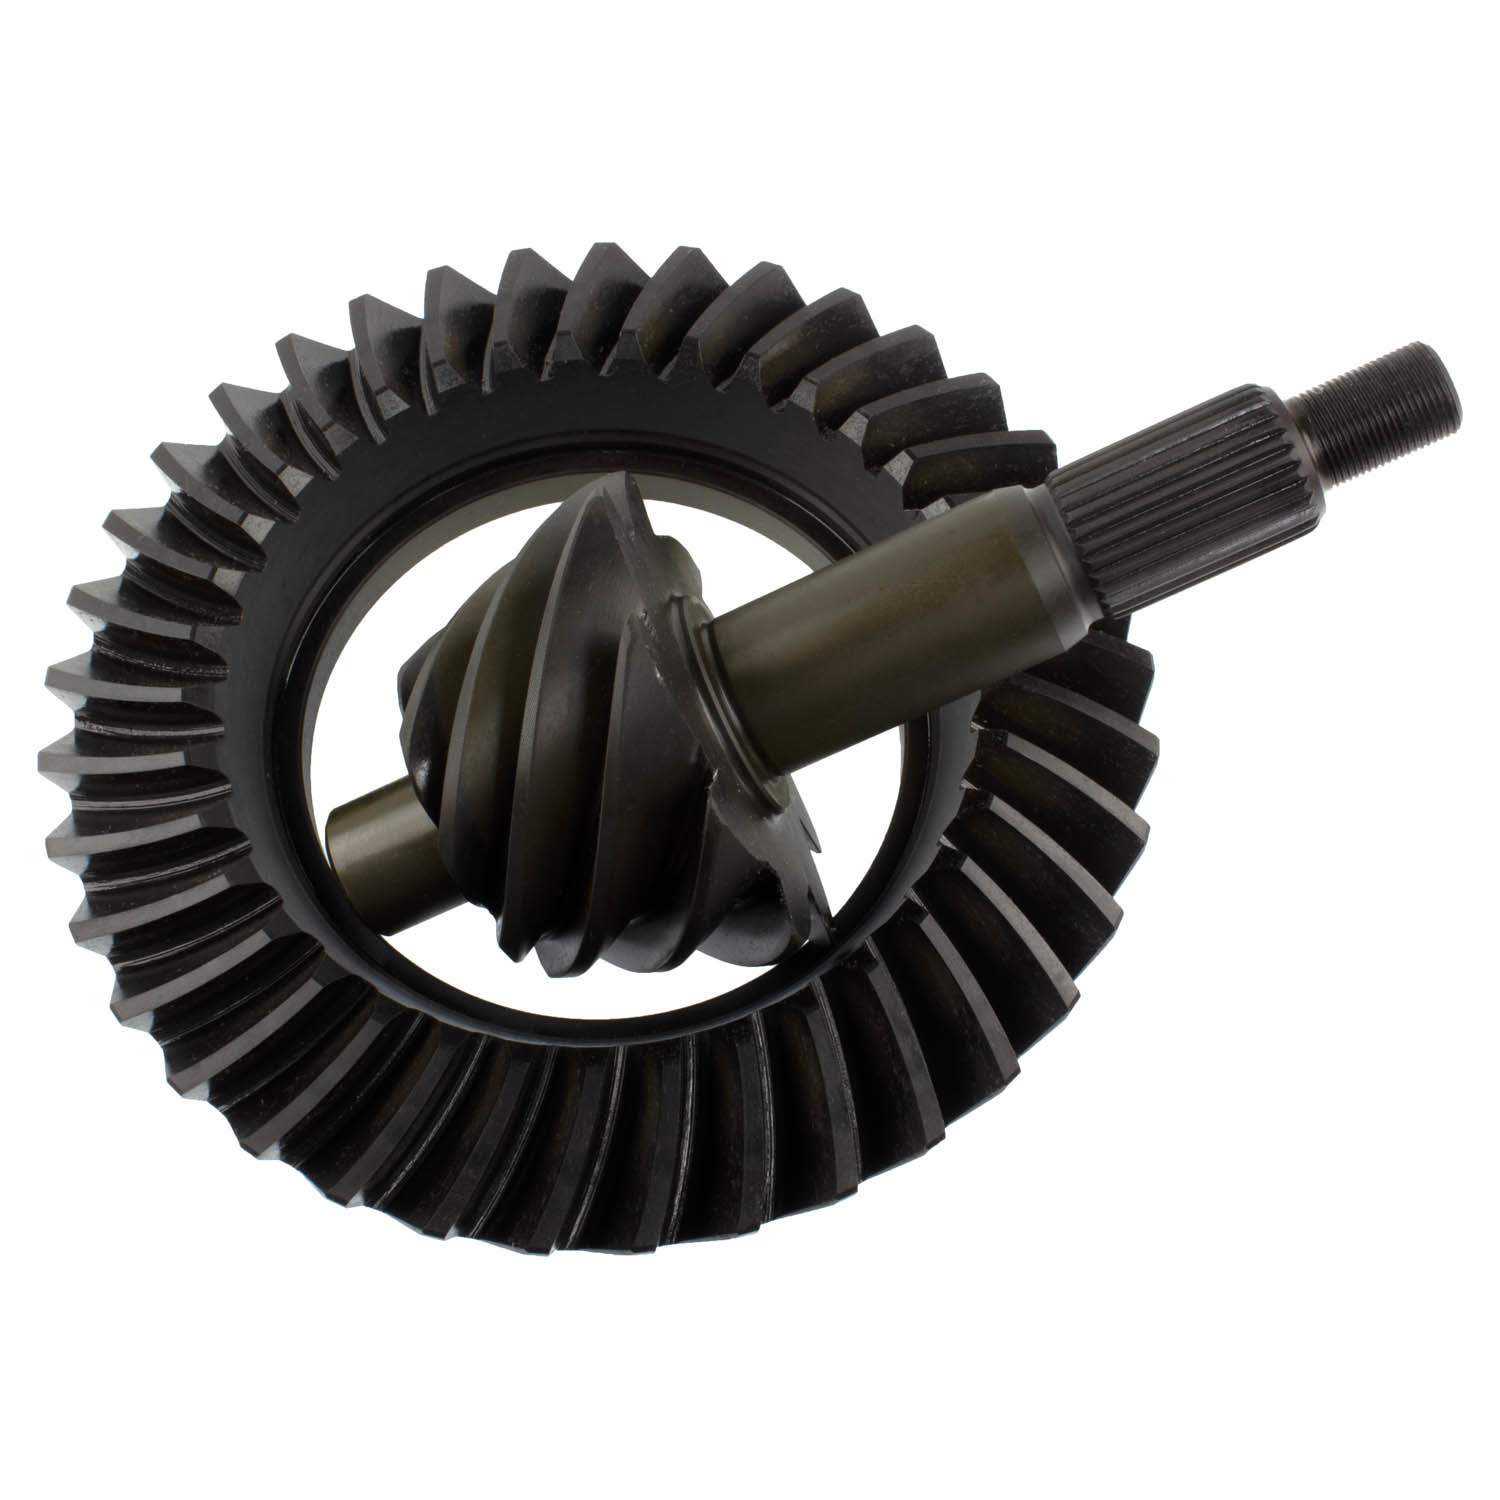 Richmond Gear F9411 - Ring and Pinion, Excel, 4.11 Ratio, 28 Spline Pinion, Ford 9 in, Kit